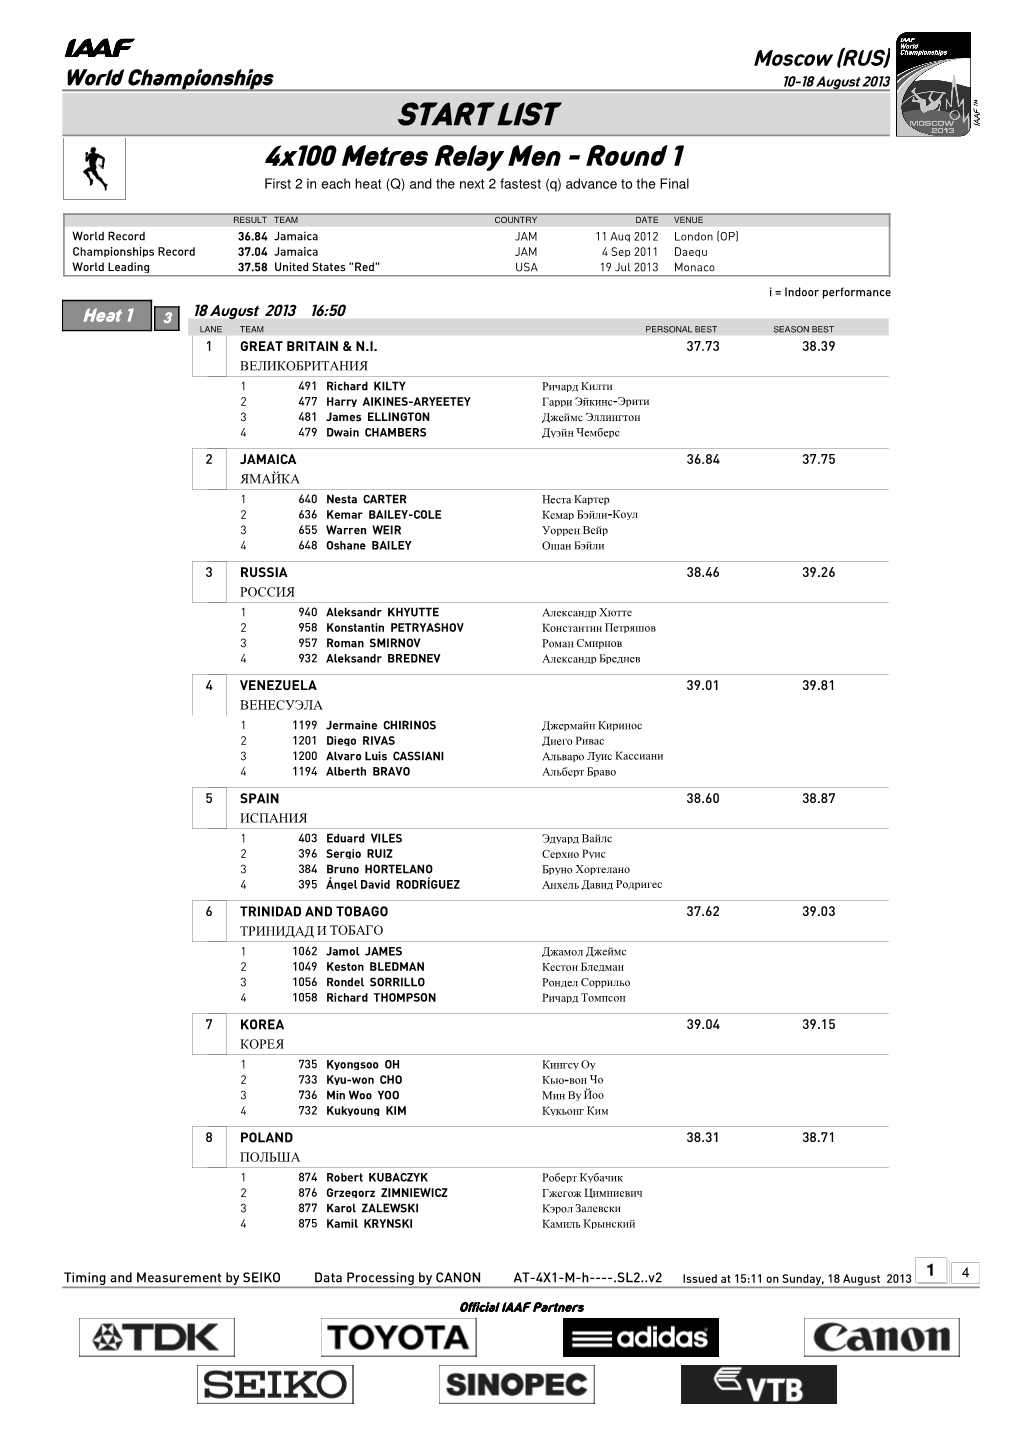 START LIST 4X100 Metres Relay Men - Round 1 First 2 in Each Heat (Q) and the Next 2 Fastest (Q) Advance to the Final